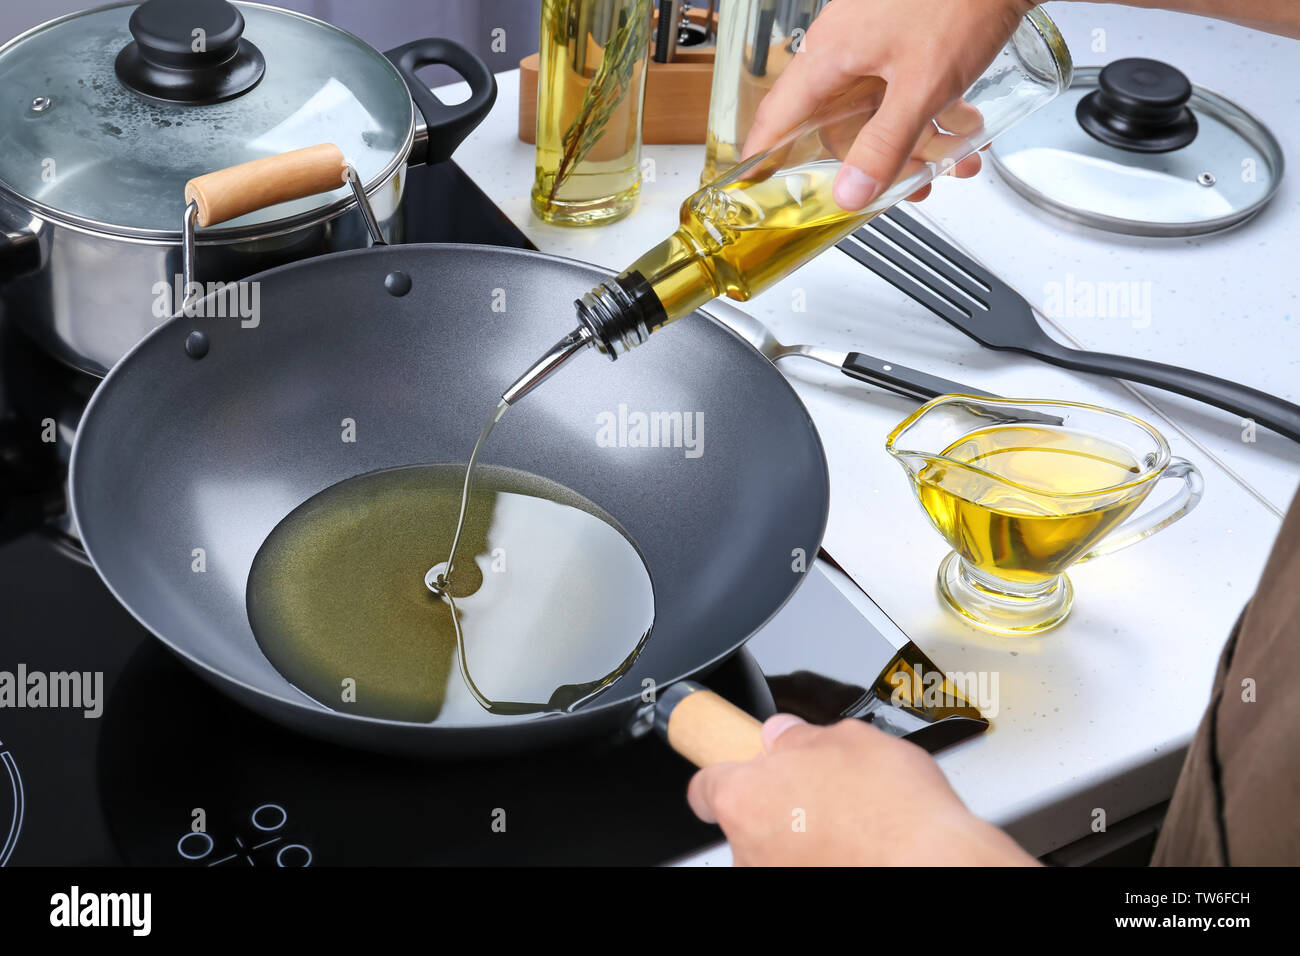 Man pouring cooking oil from bottle into frying pan on stove Stock Photo -  Alamy